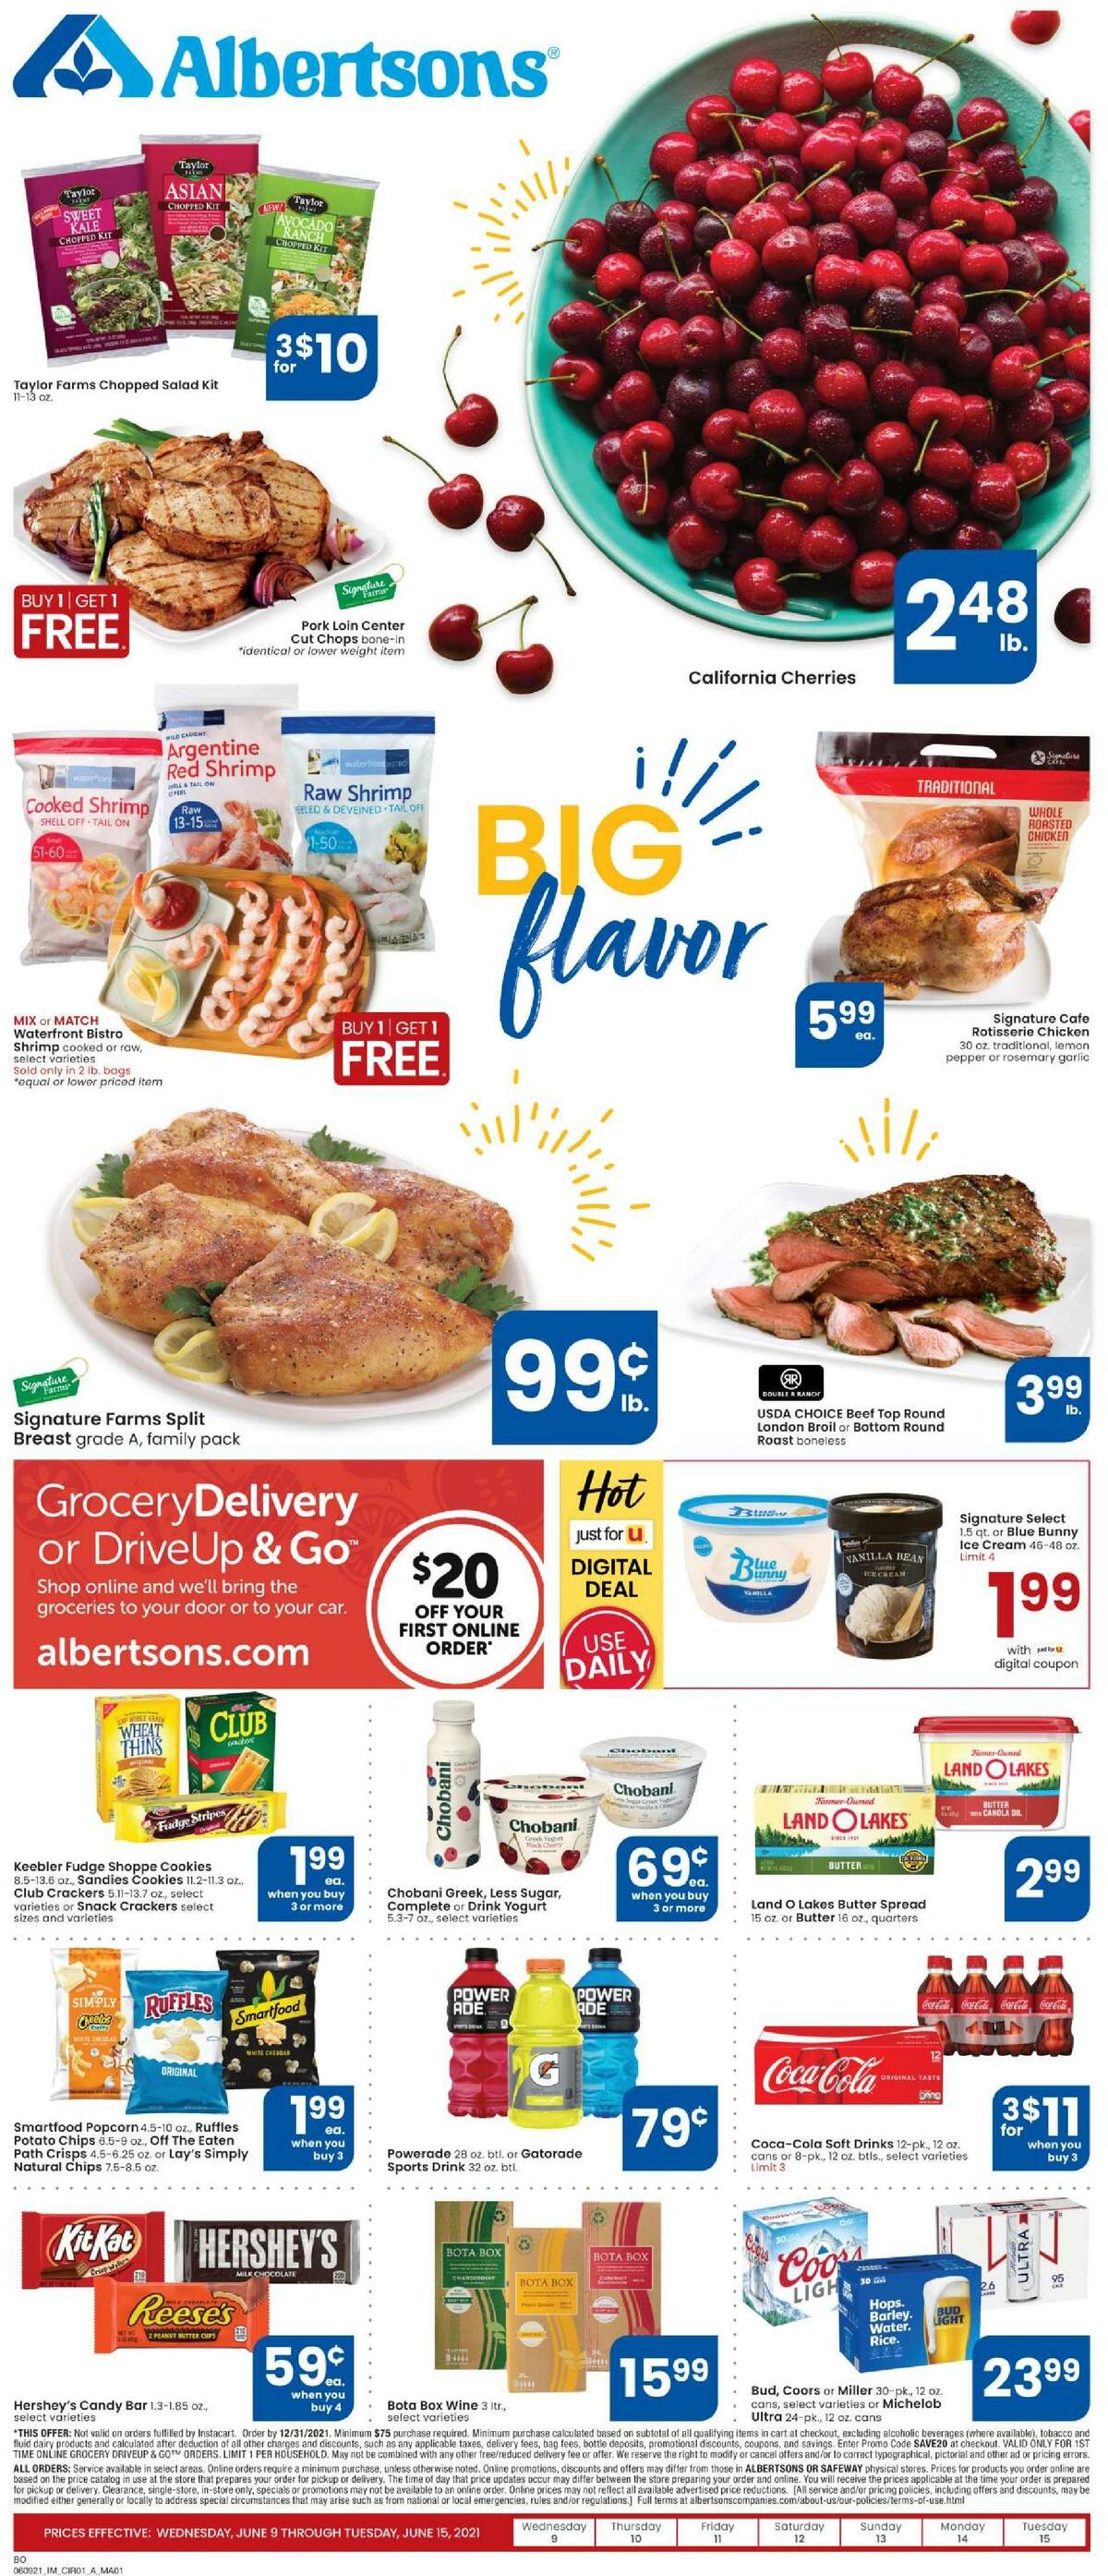 Albertsons Weekly Ad from June 9